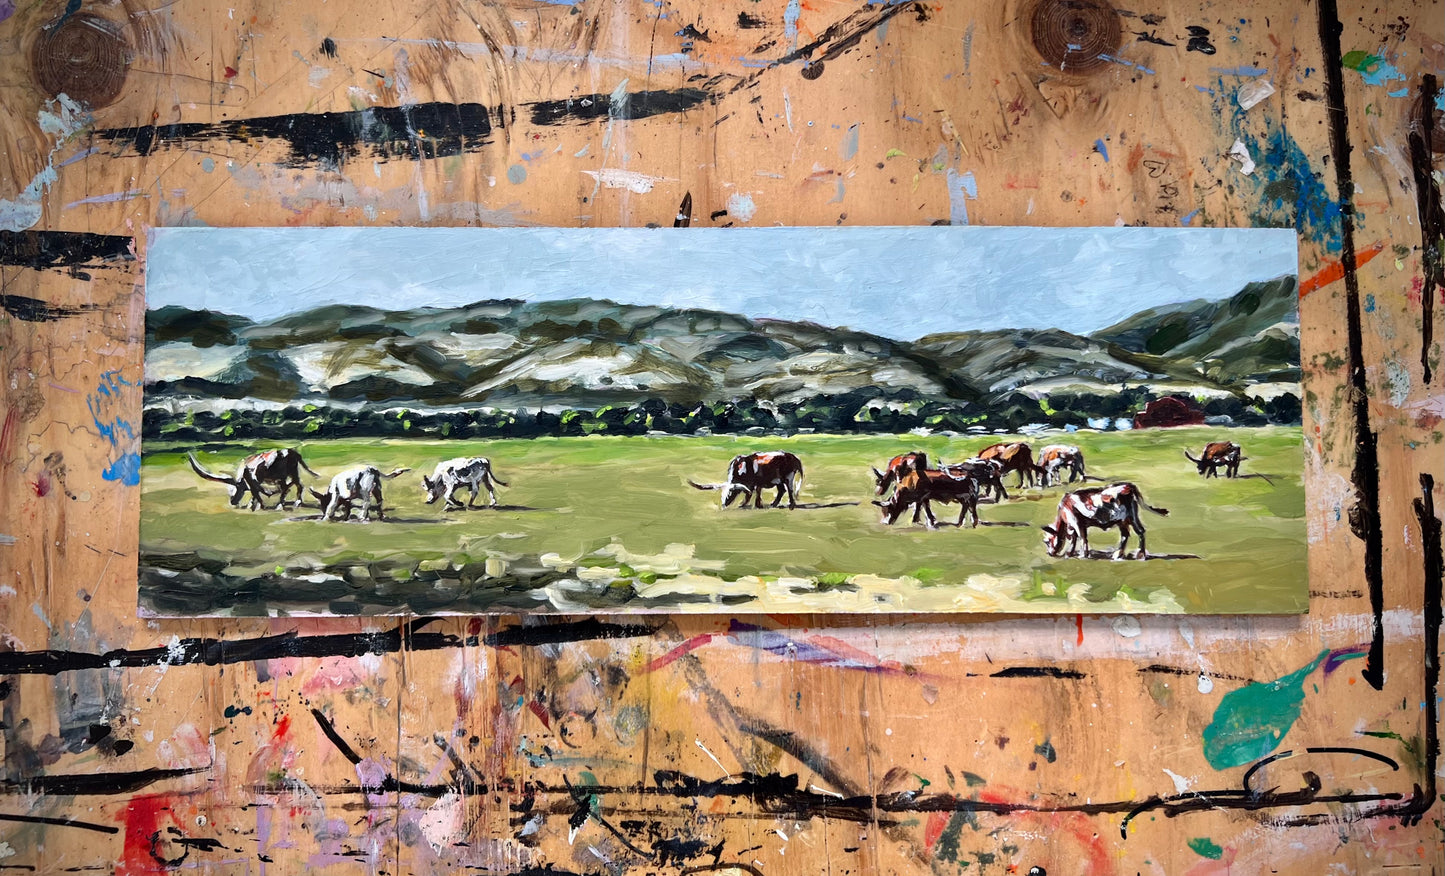 "Out To Pasture" 6x17 oil on board by Tiffiny Shults